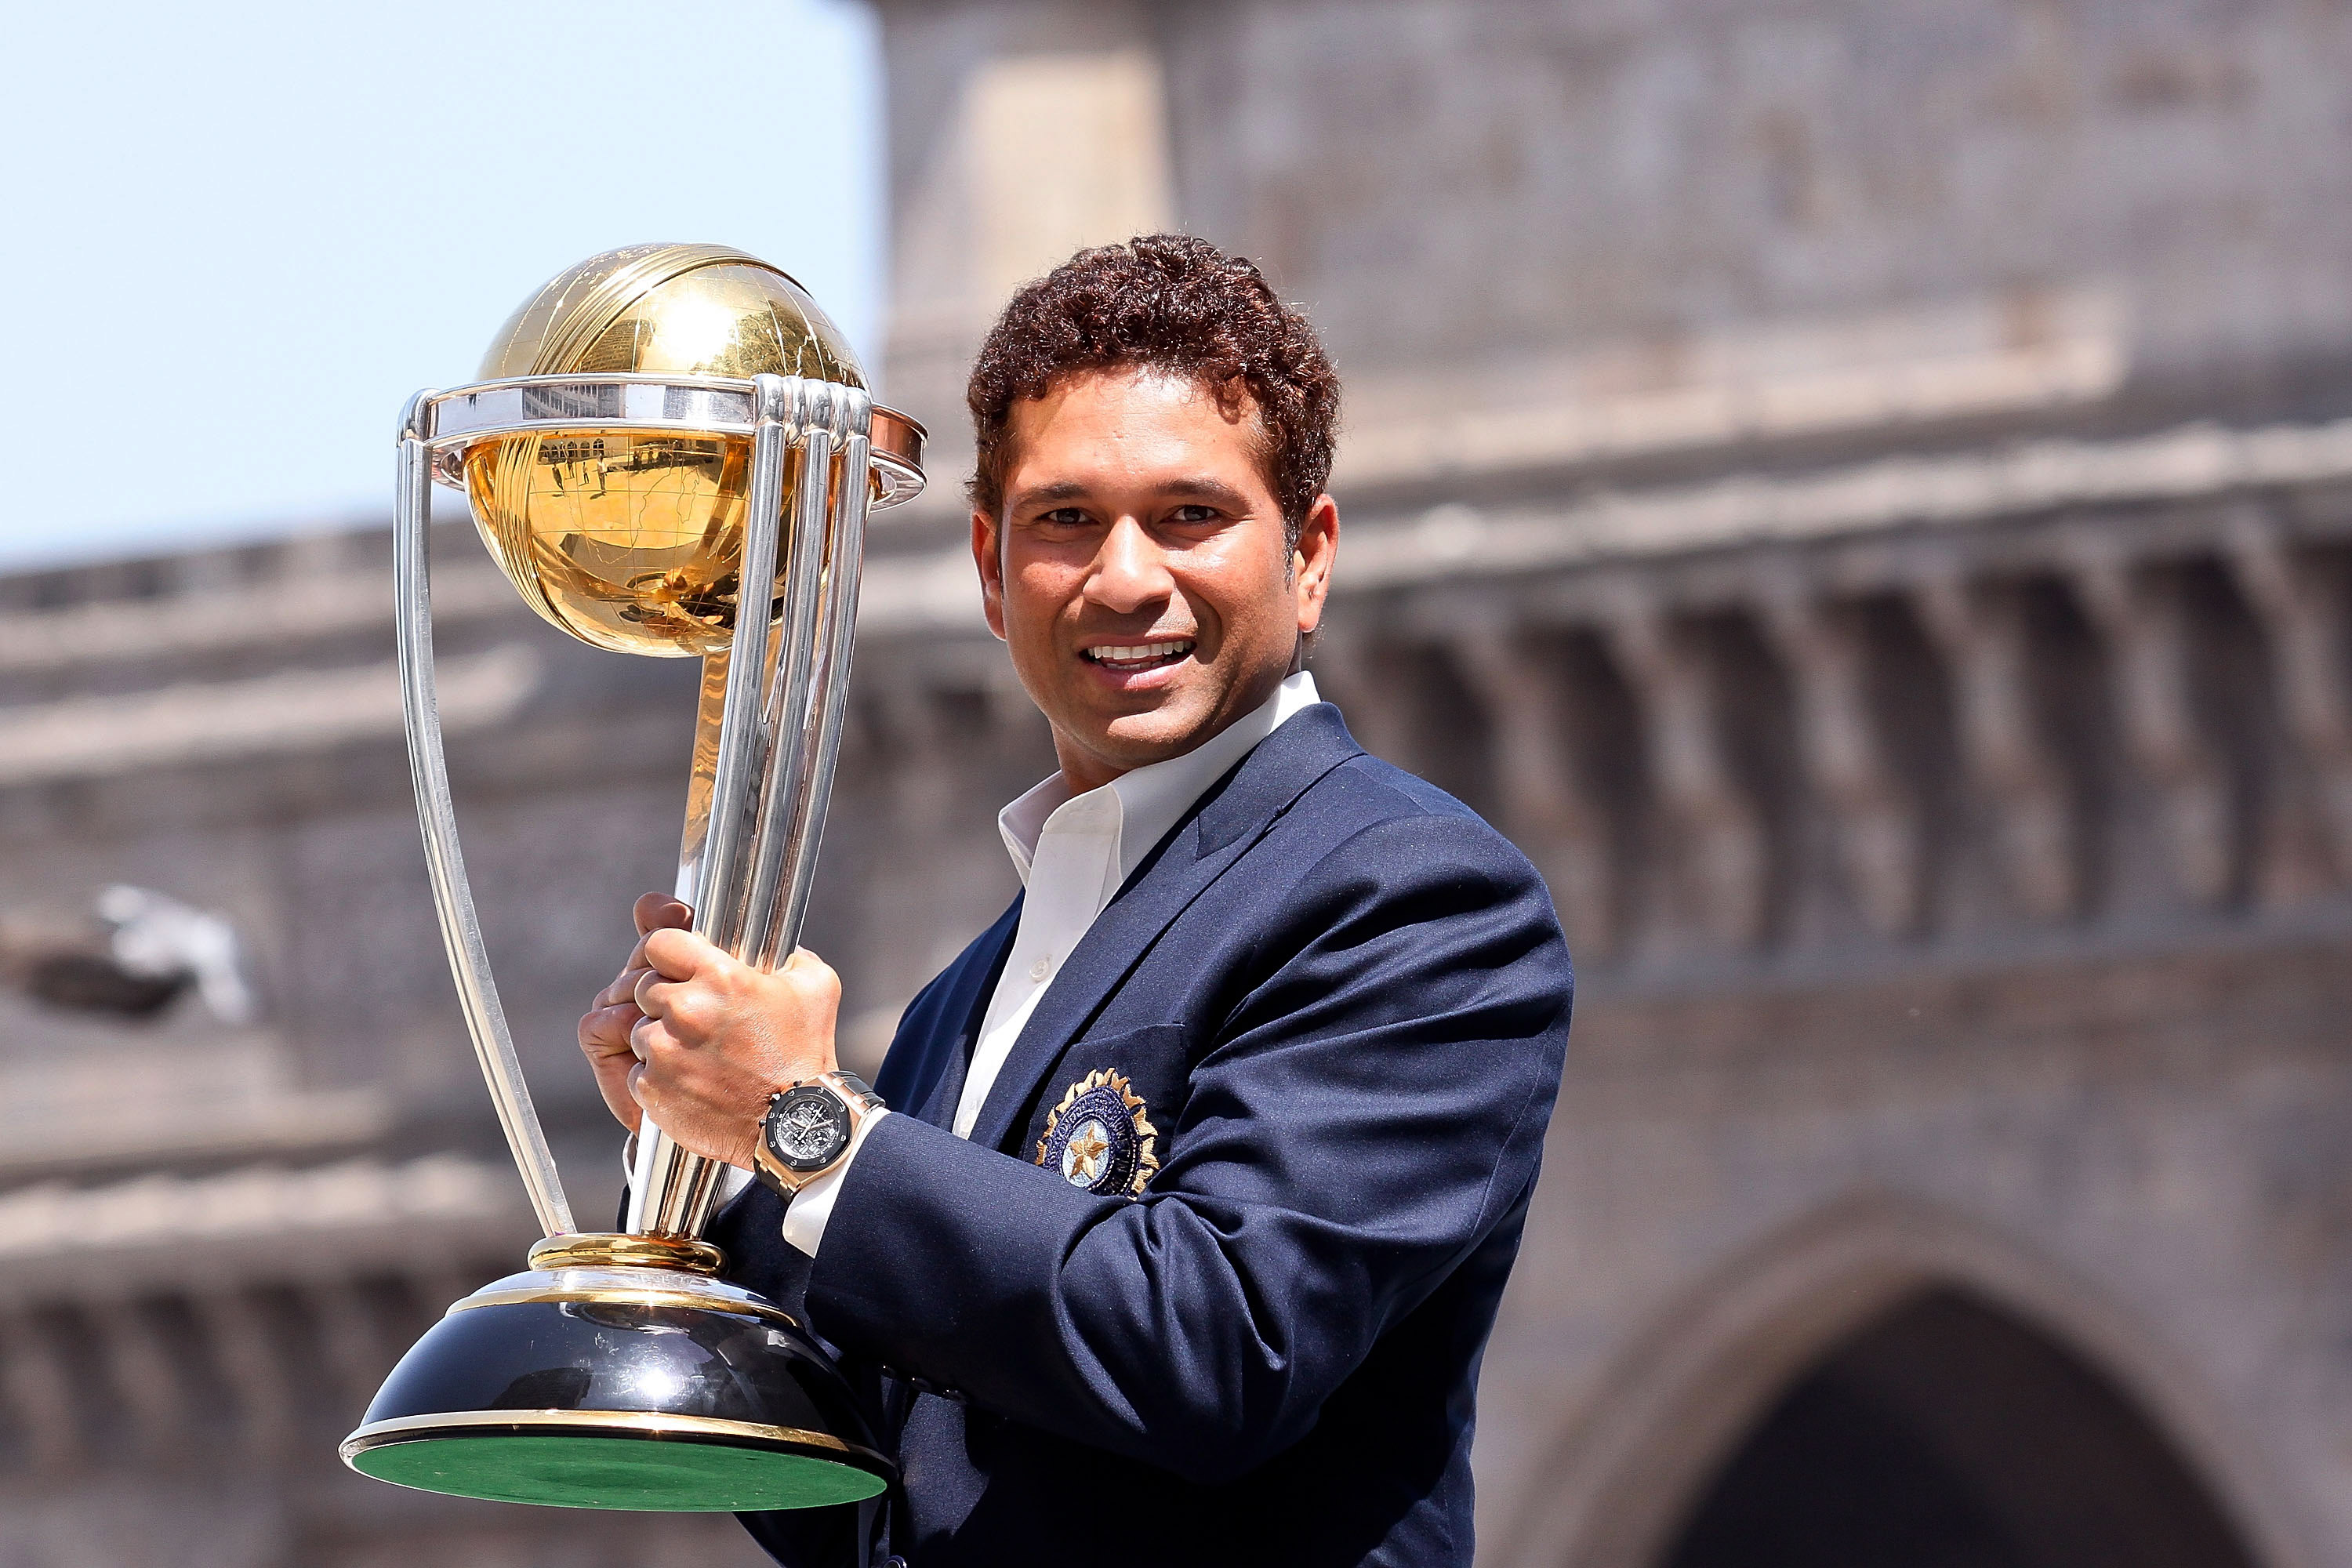 Just how much did Sachin mean to us?